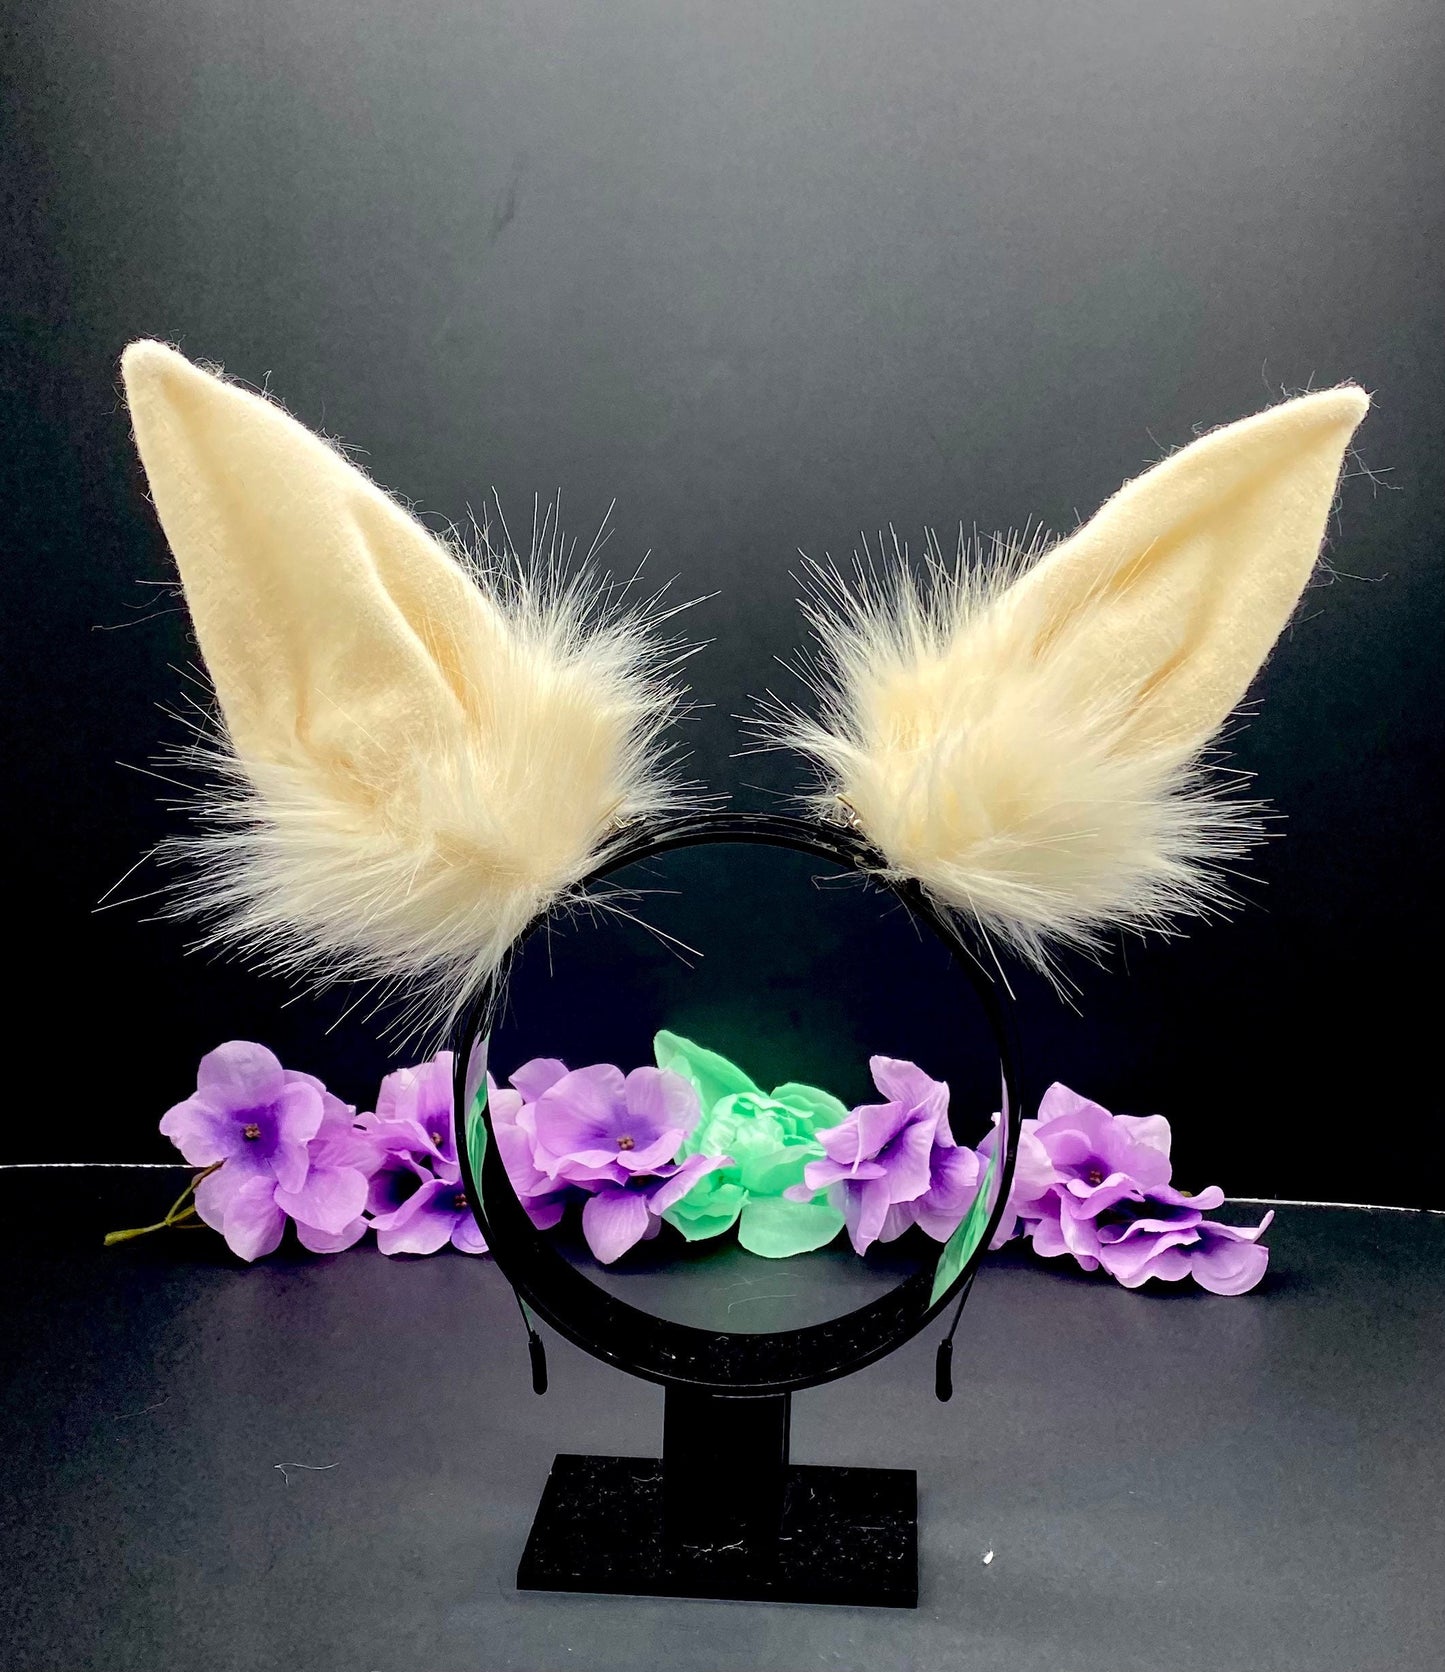 Handmade Bendable Bunny Ears Headband for Pet Play and Animal Roleplay | Cute Cosplay Accessories Gift Ideas-Faux Fur Rabbit Ears